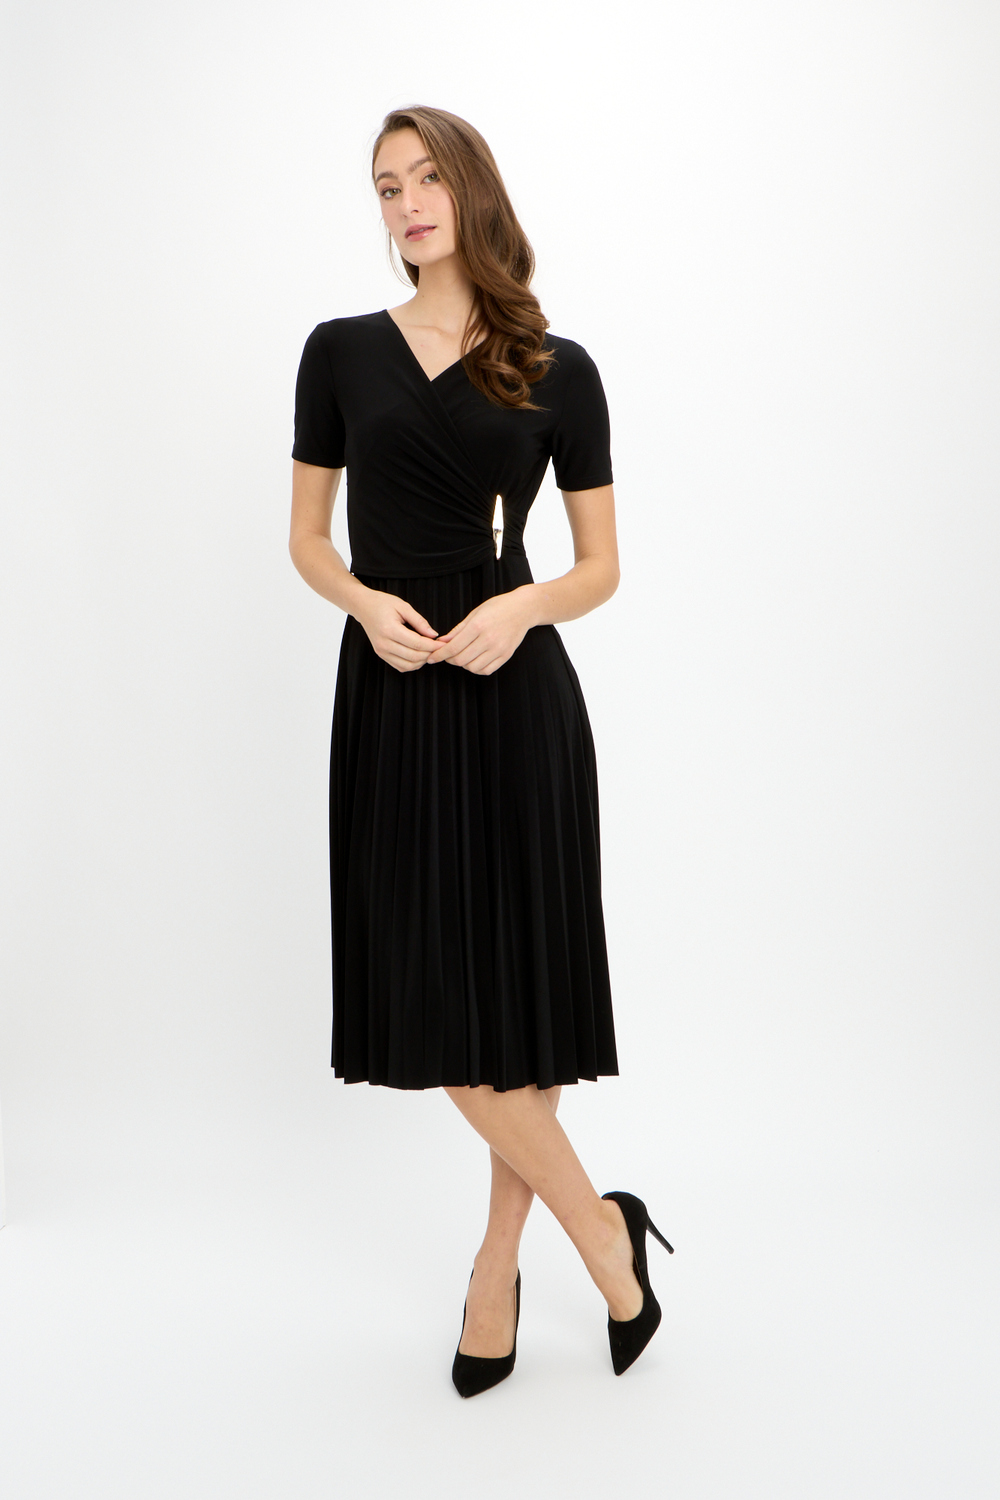 Wrap Front Pleated Dress Style 241013. Black